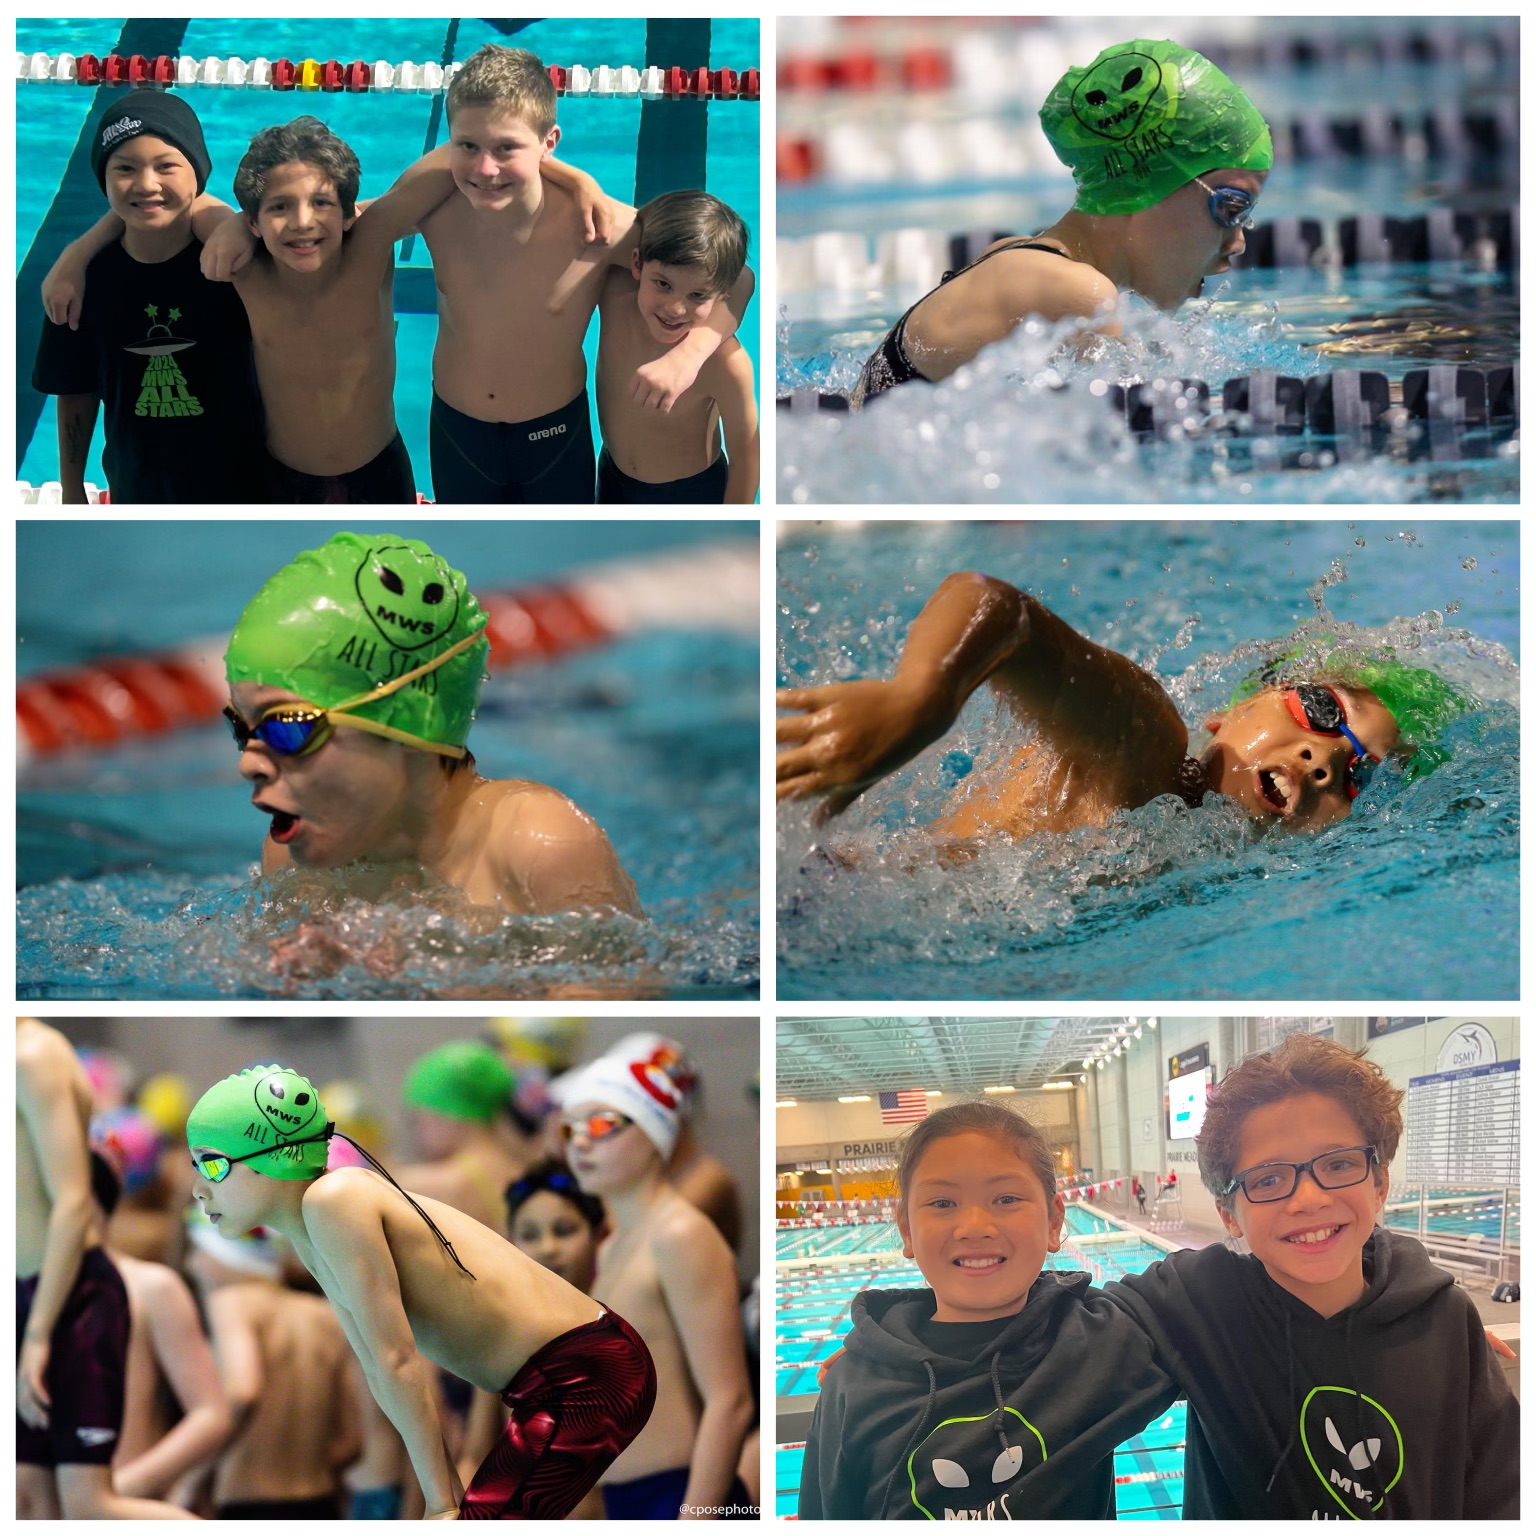 Raiders Club Swim Team Competes at Midwest All-Star Championships